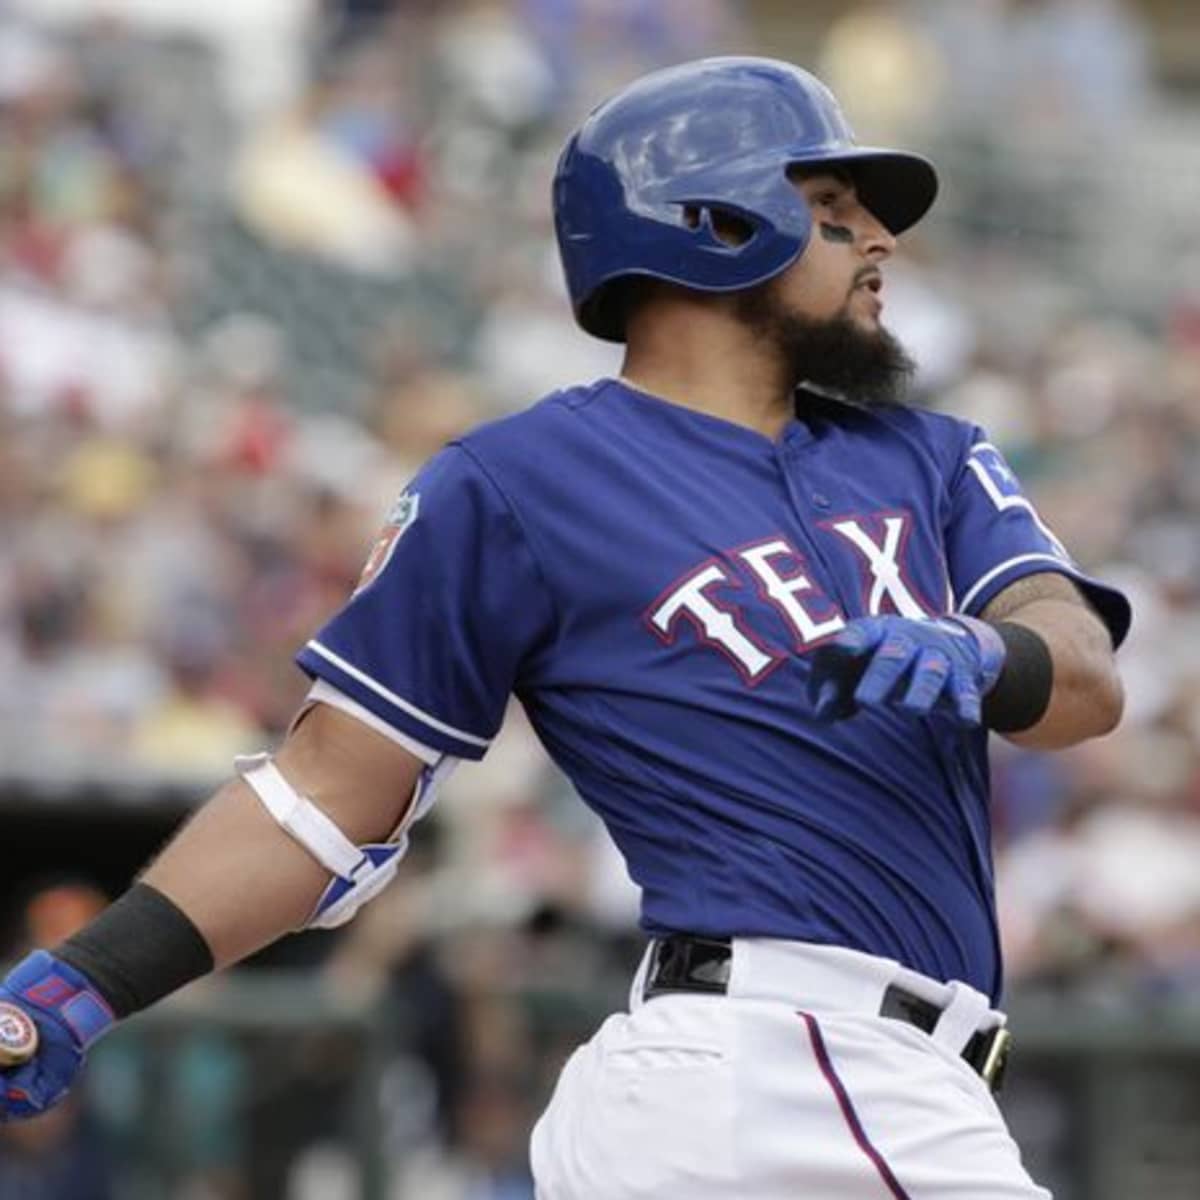 The Rangers have signed Rougned Odor's younger brother. He is also